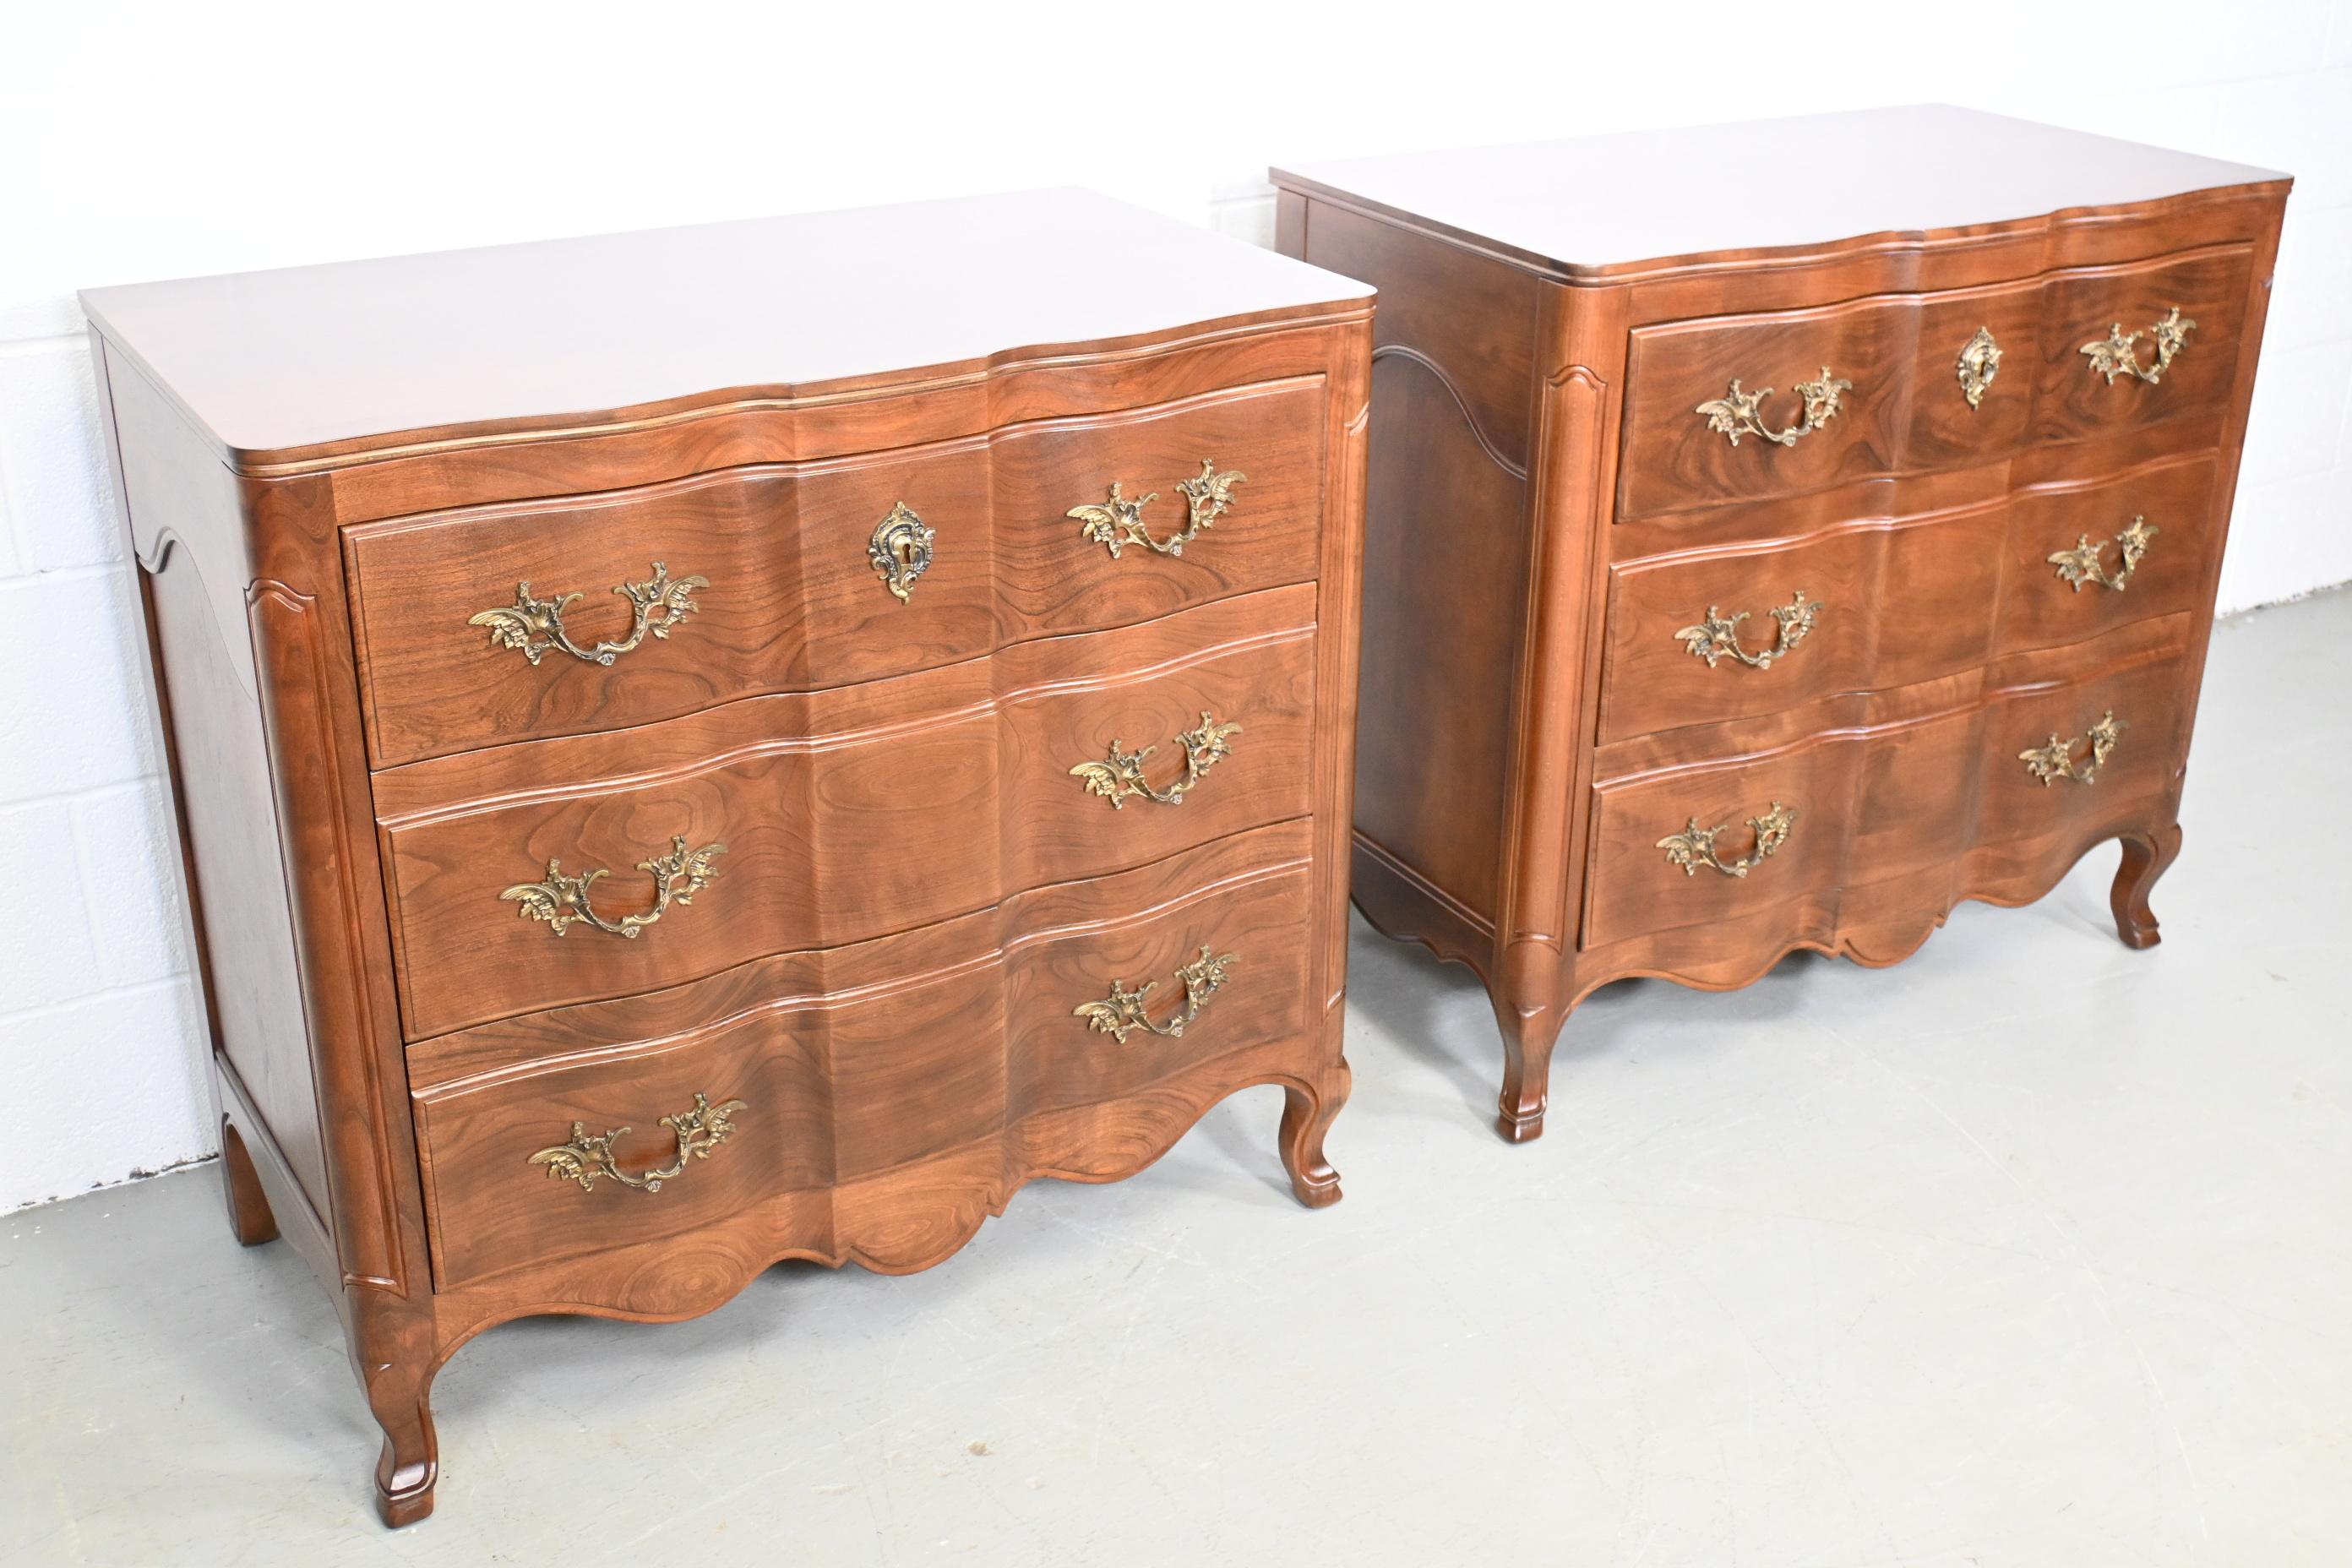 Lacquered John Widdicomb French Provincial Cherry Dressers, a Pair